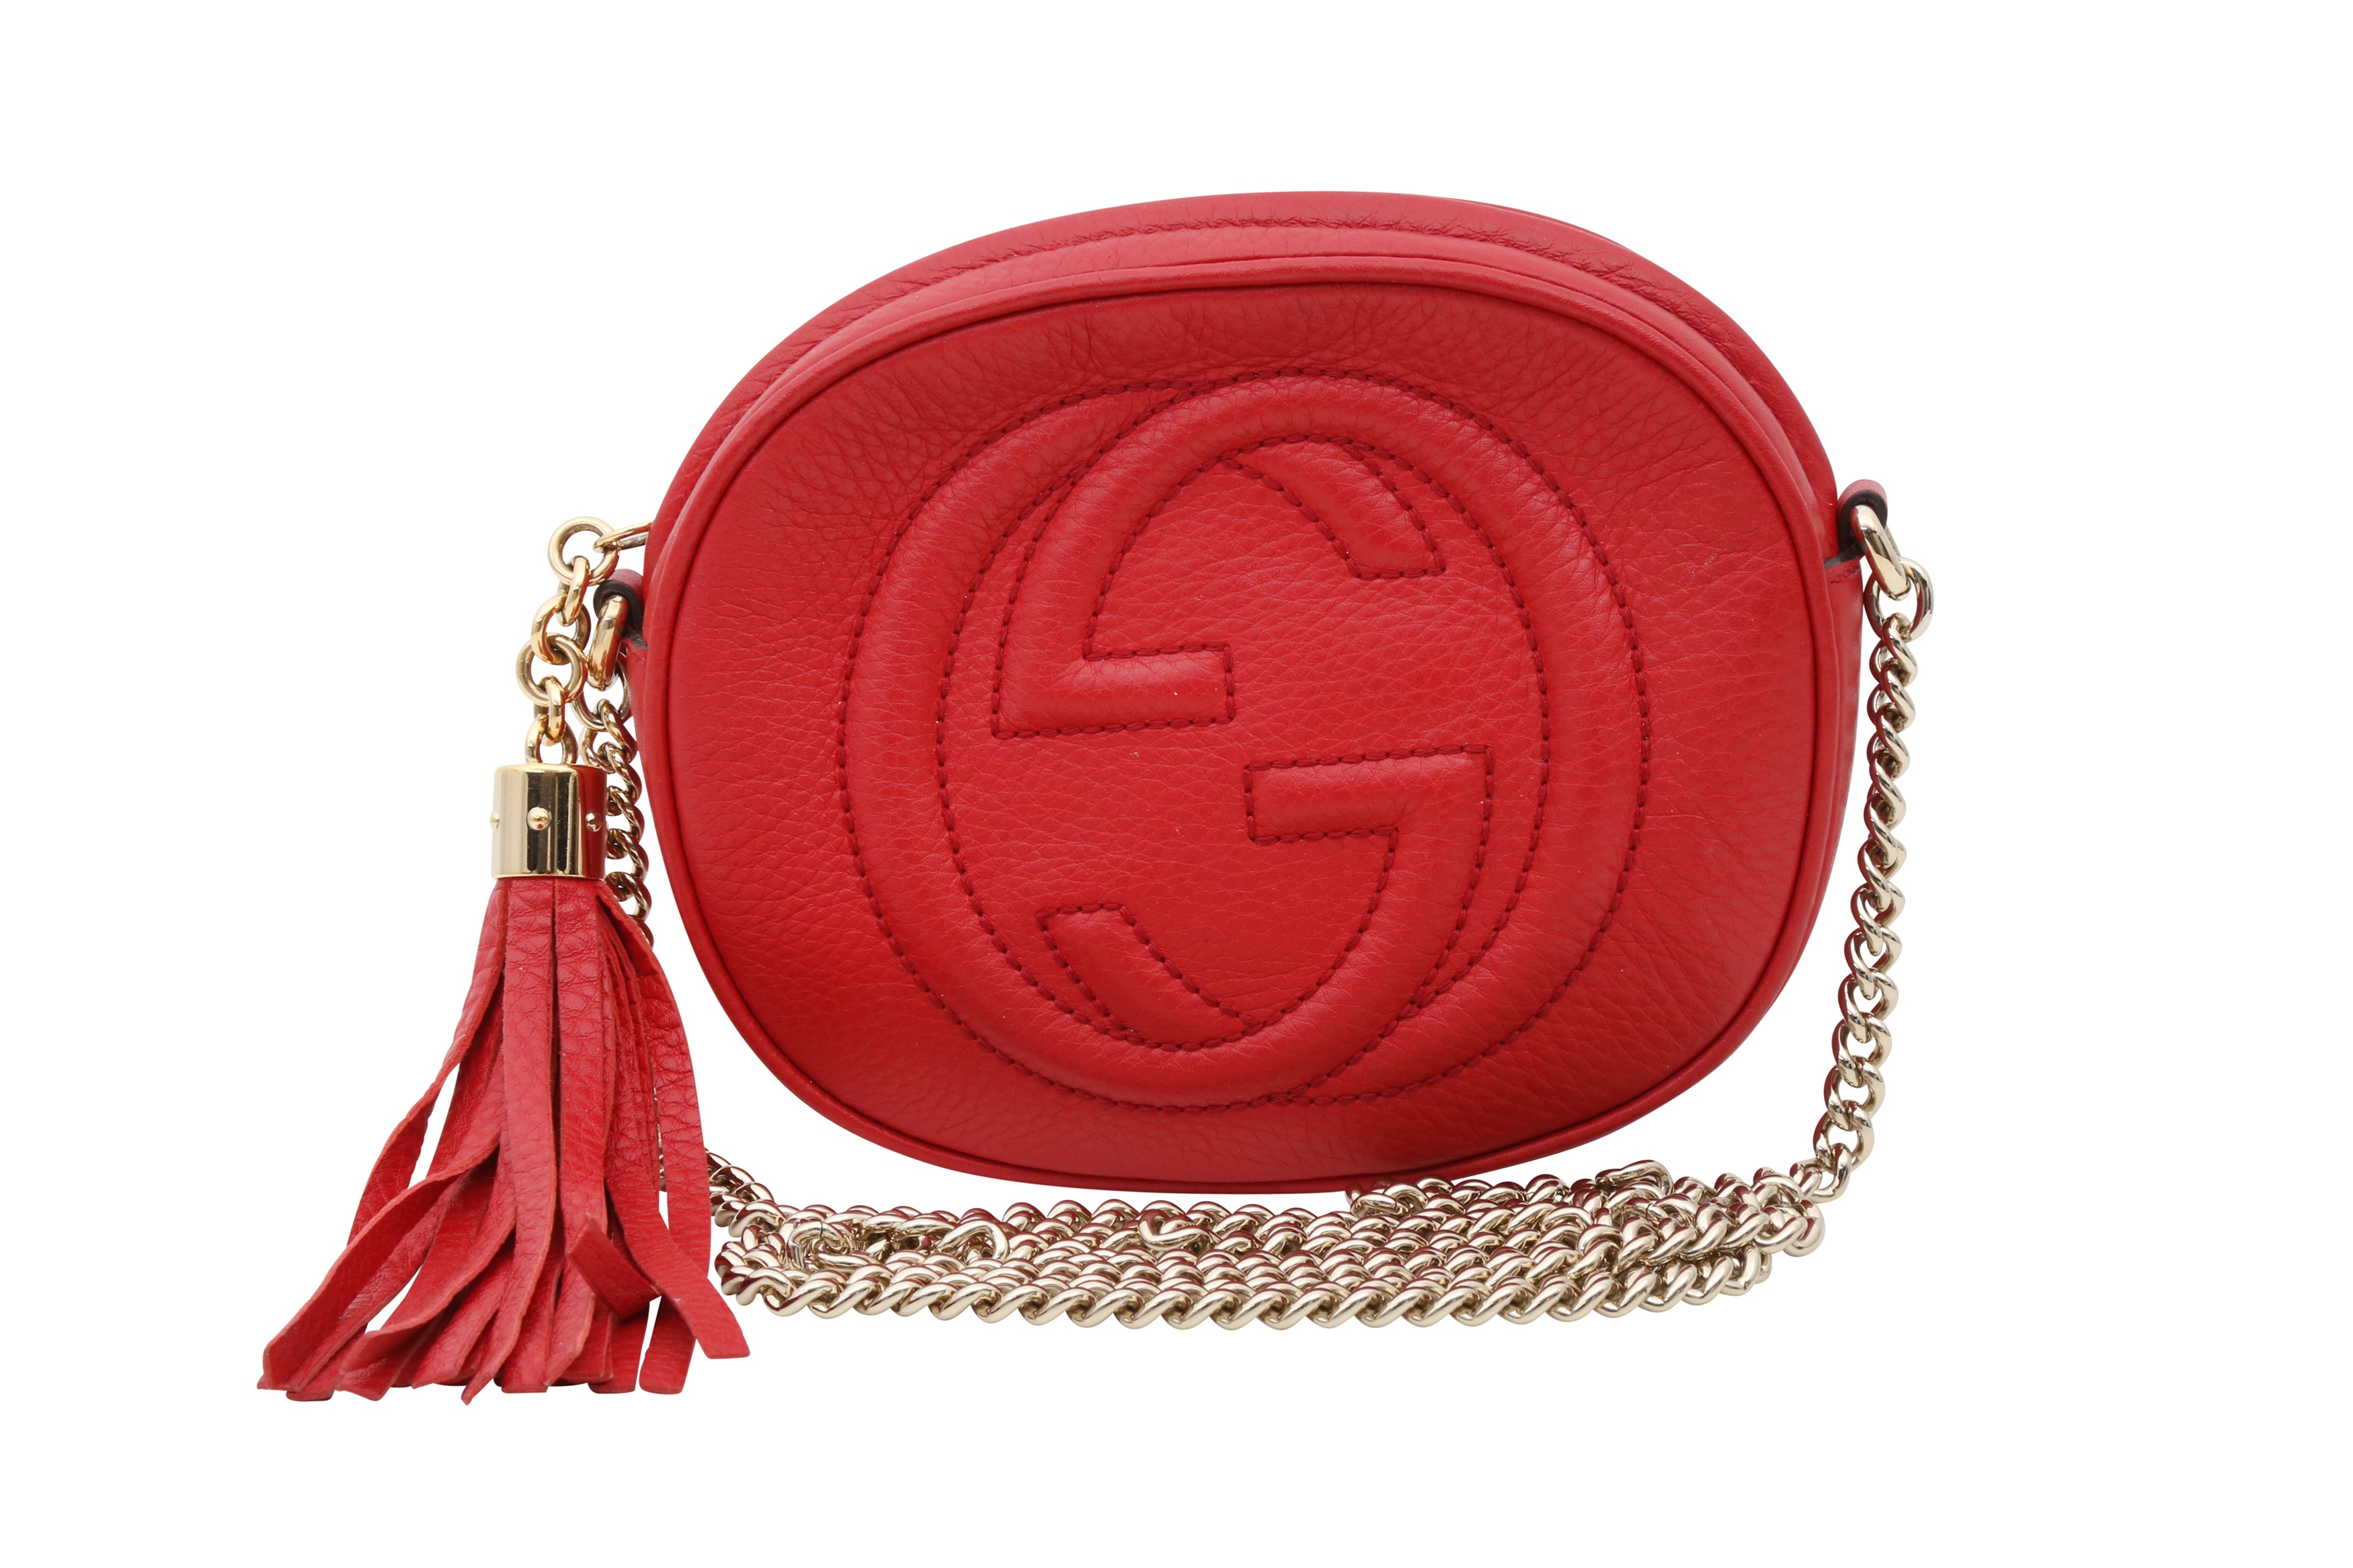 Gucci Soho Disco Wallet on Chain Red